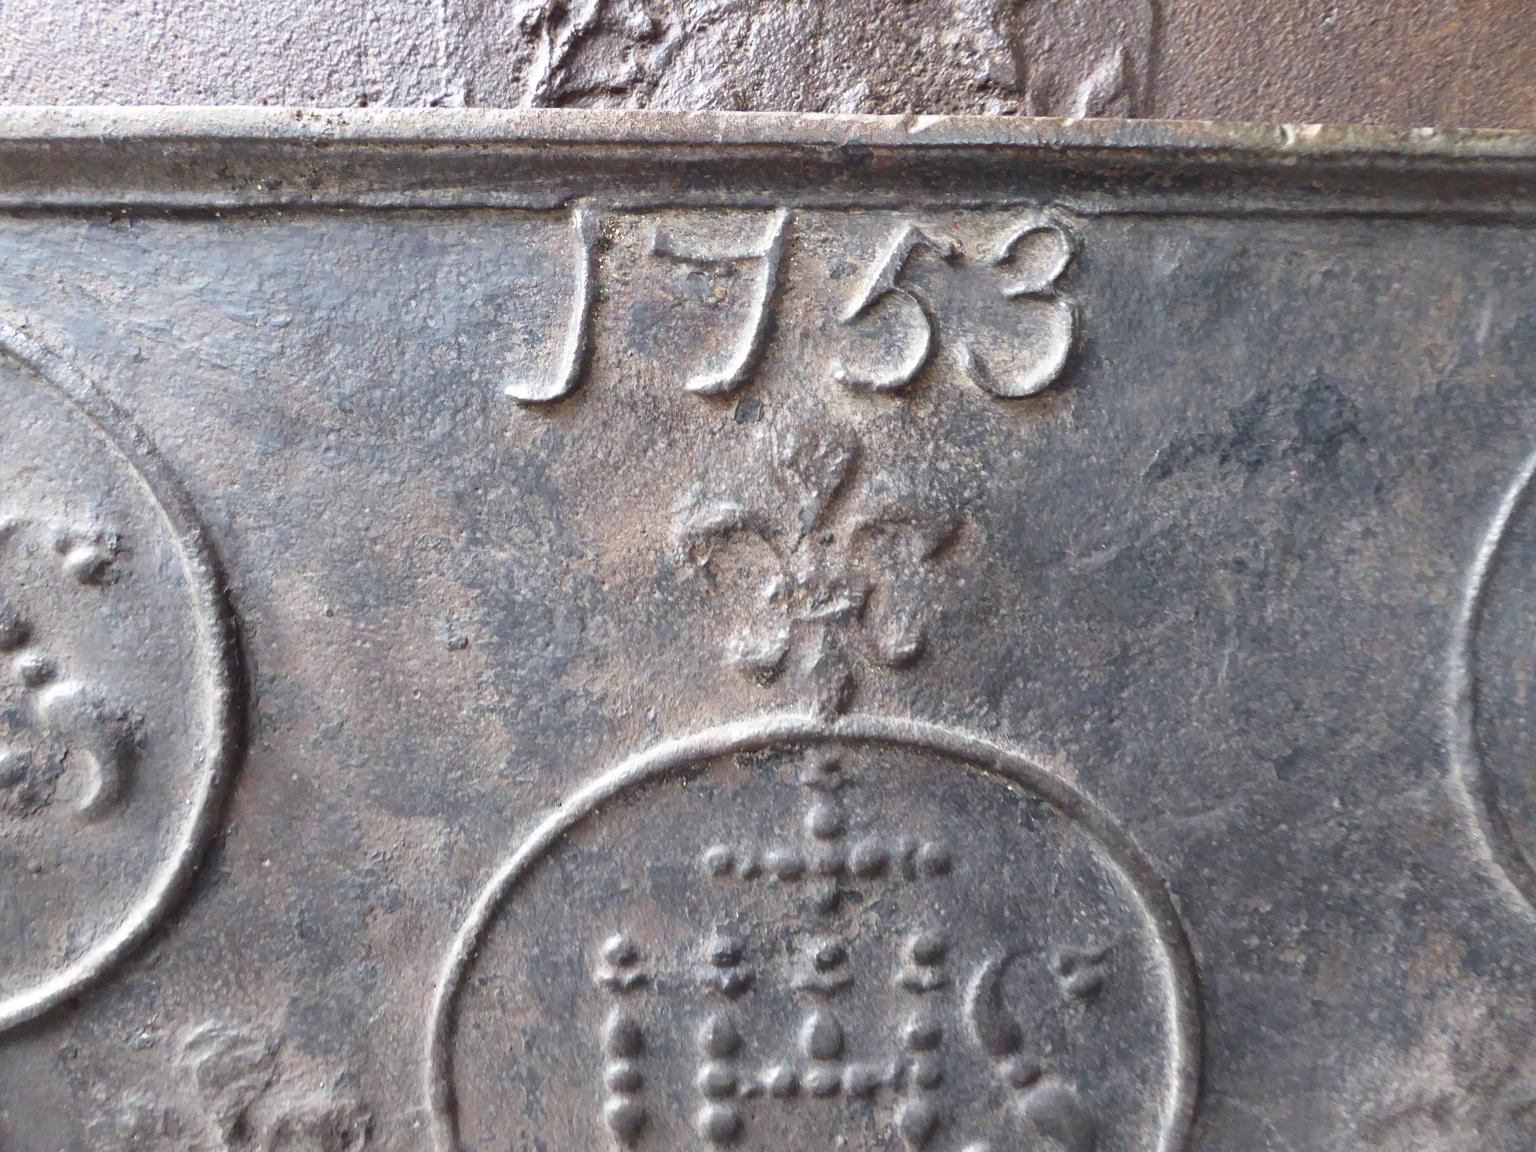 18th century Louis XV French fireback with pillars, three IHS monograms, and the date of production 1753.

The monogram IHS stands for Iesus Hominum Salvator (Jesus the Savior of Humanity) or In Hoc Signo (In this sign will you win). The pillars